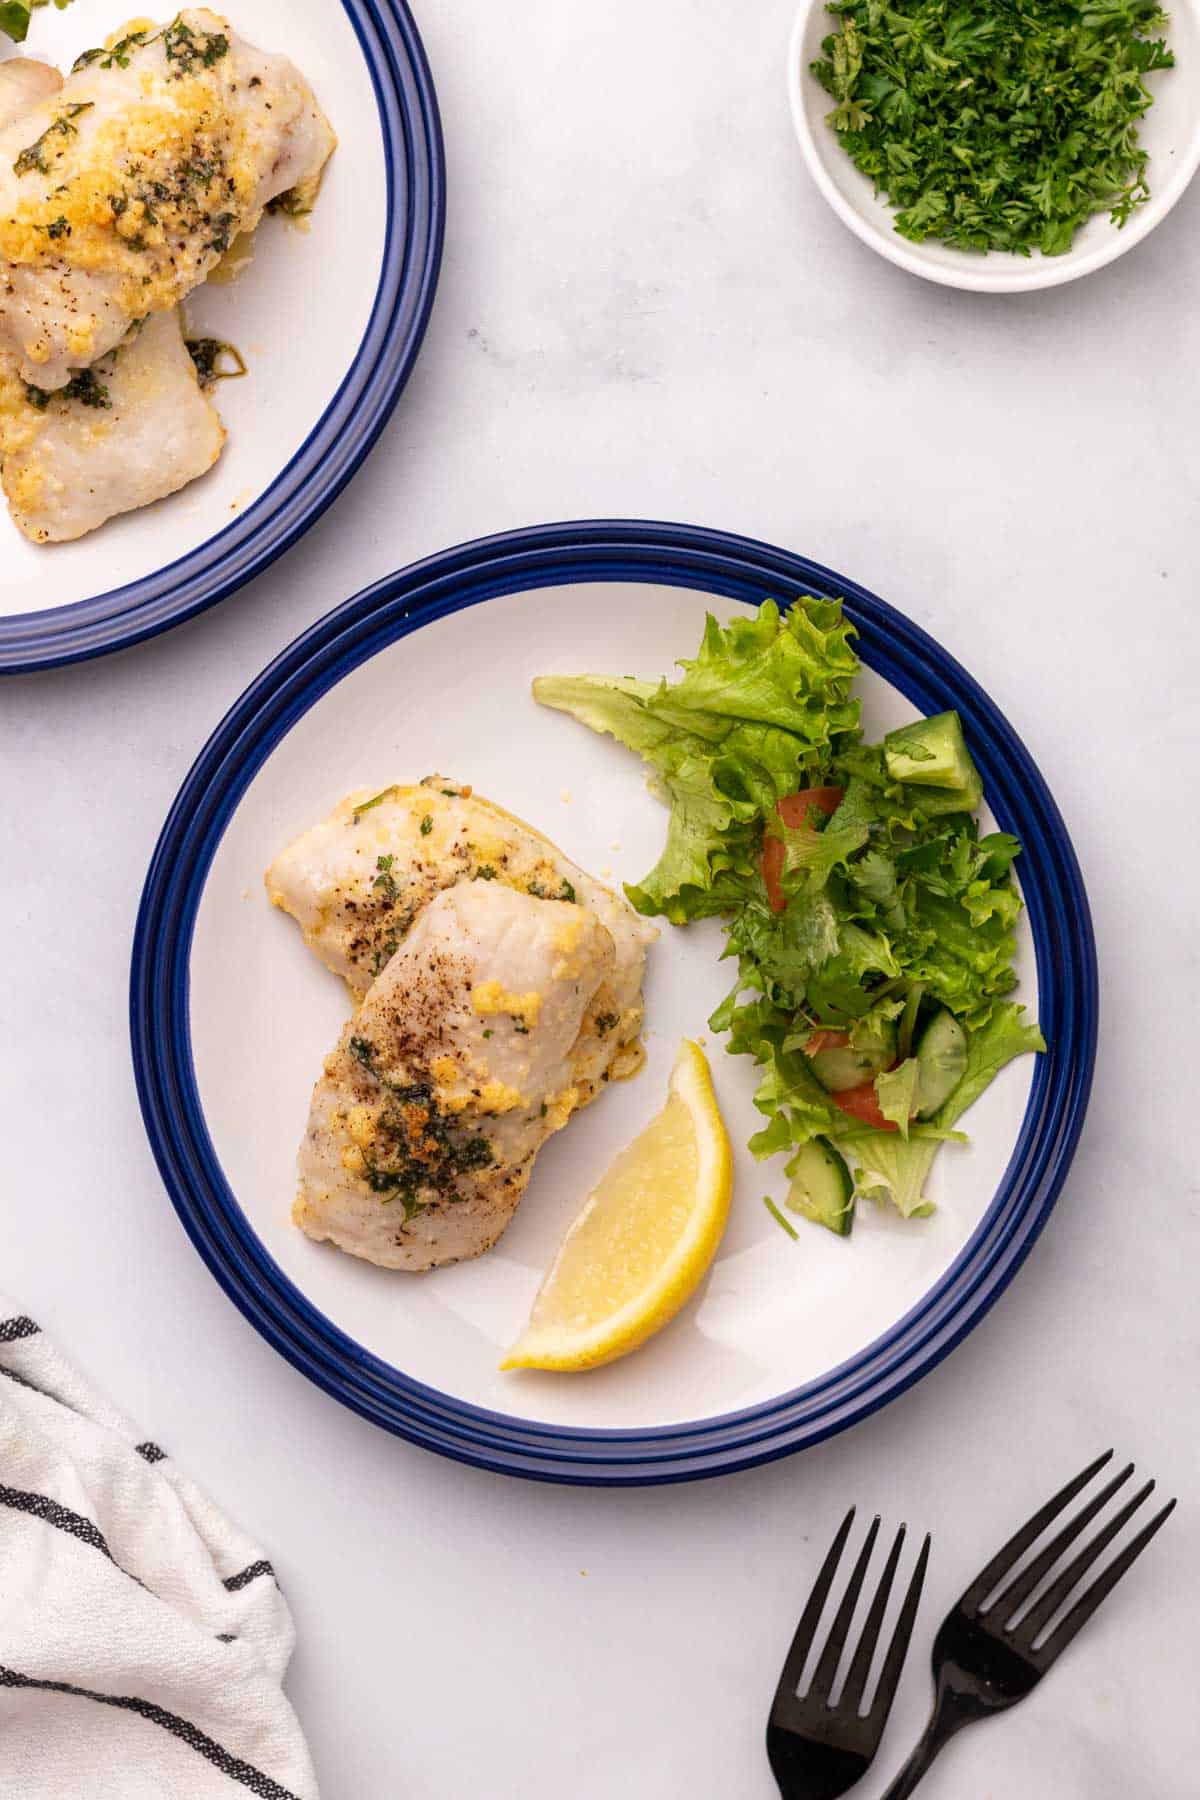 Two cod filets on a plate with a lemon wedge and salad